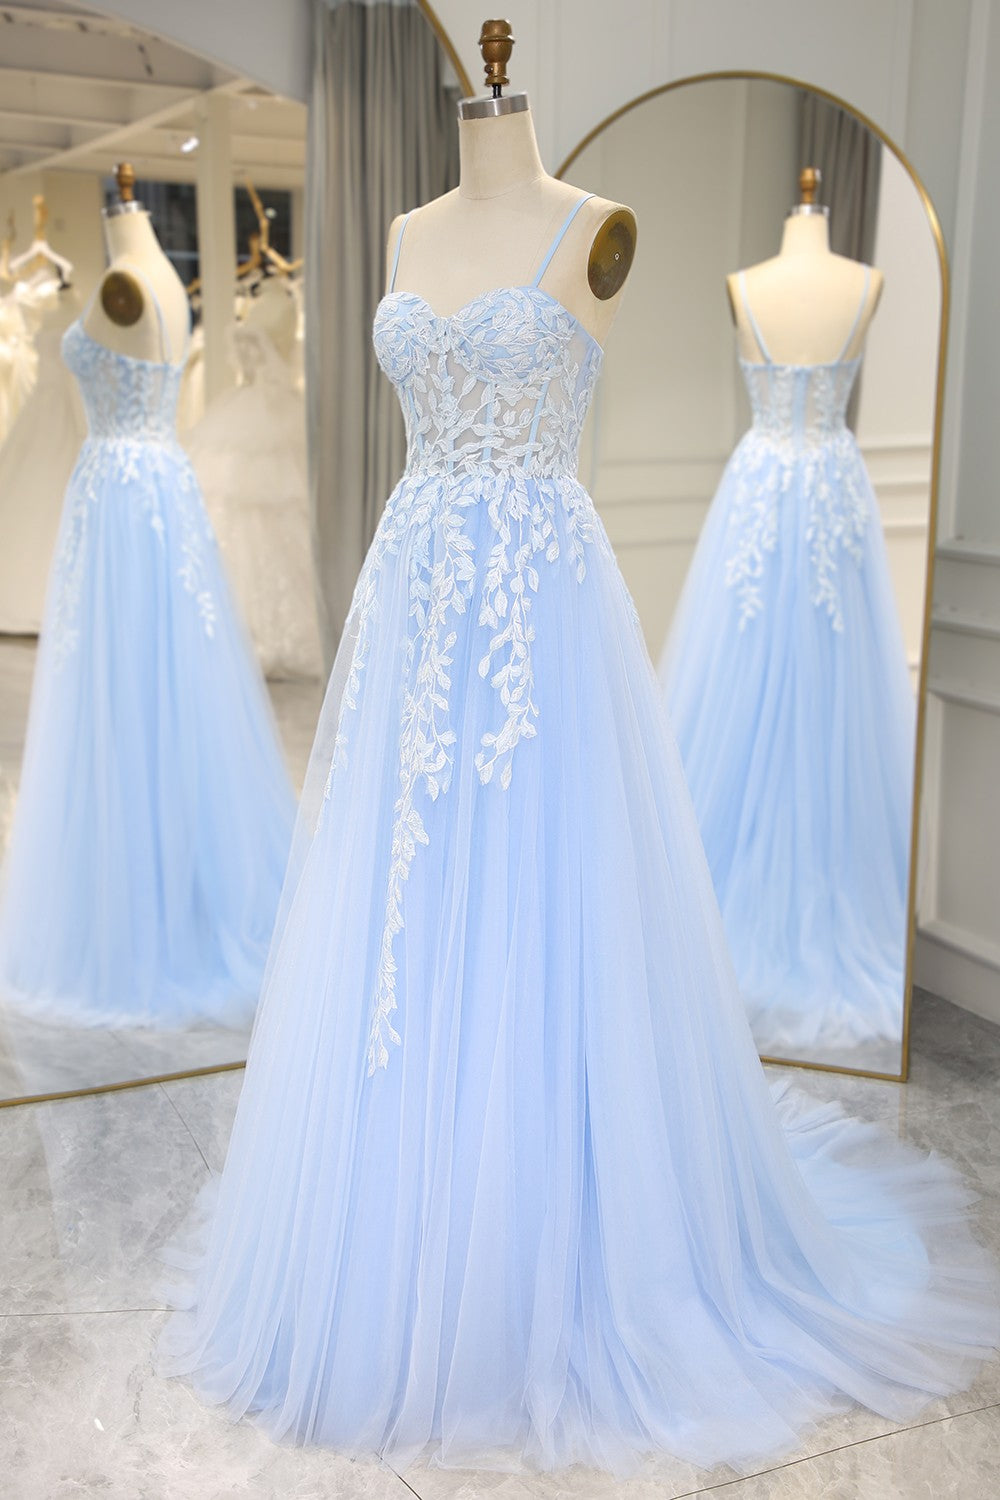 Sky Blue Spaghetti Straps Long Mermaid Prom Dress With Appliques